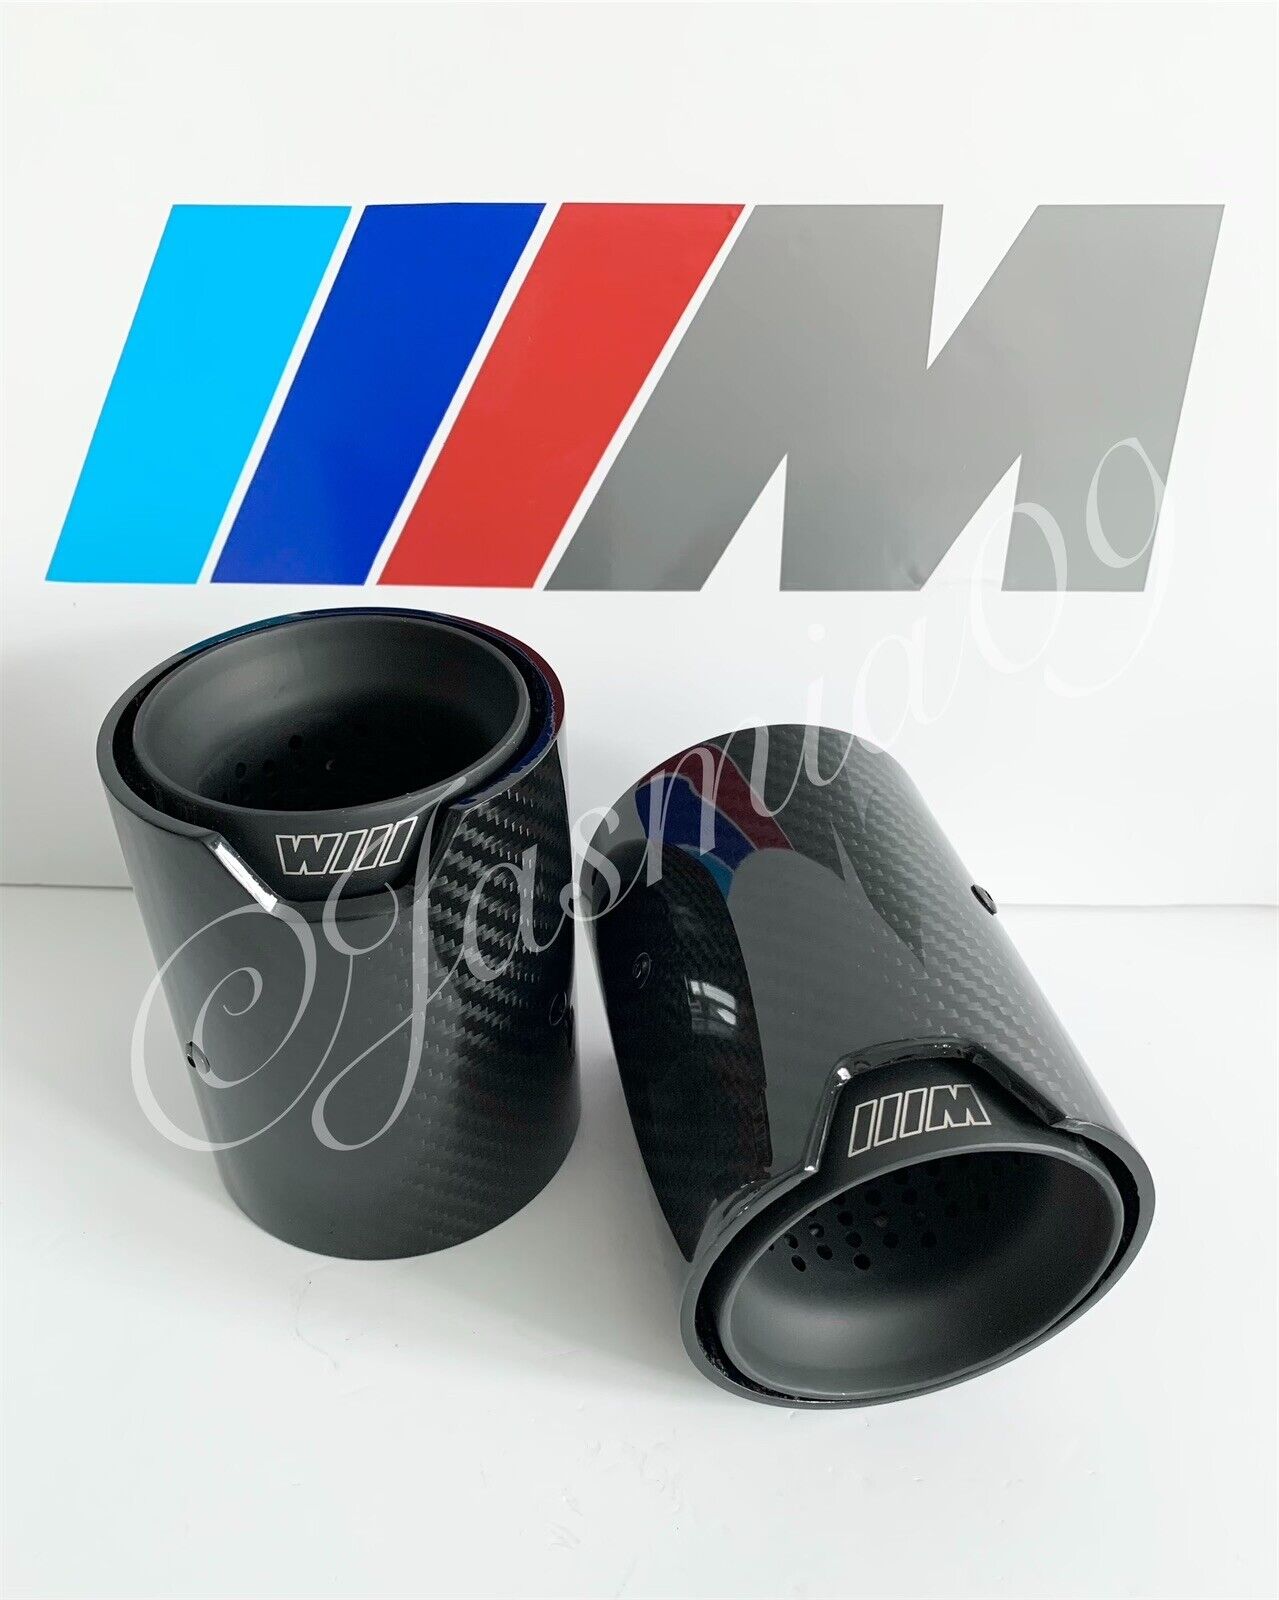 60mm M PERFORMANCE MPE STYLE CARBON EXHAUST TIPS M135i M140i M235i M240i 340 435